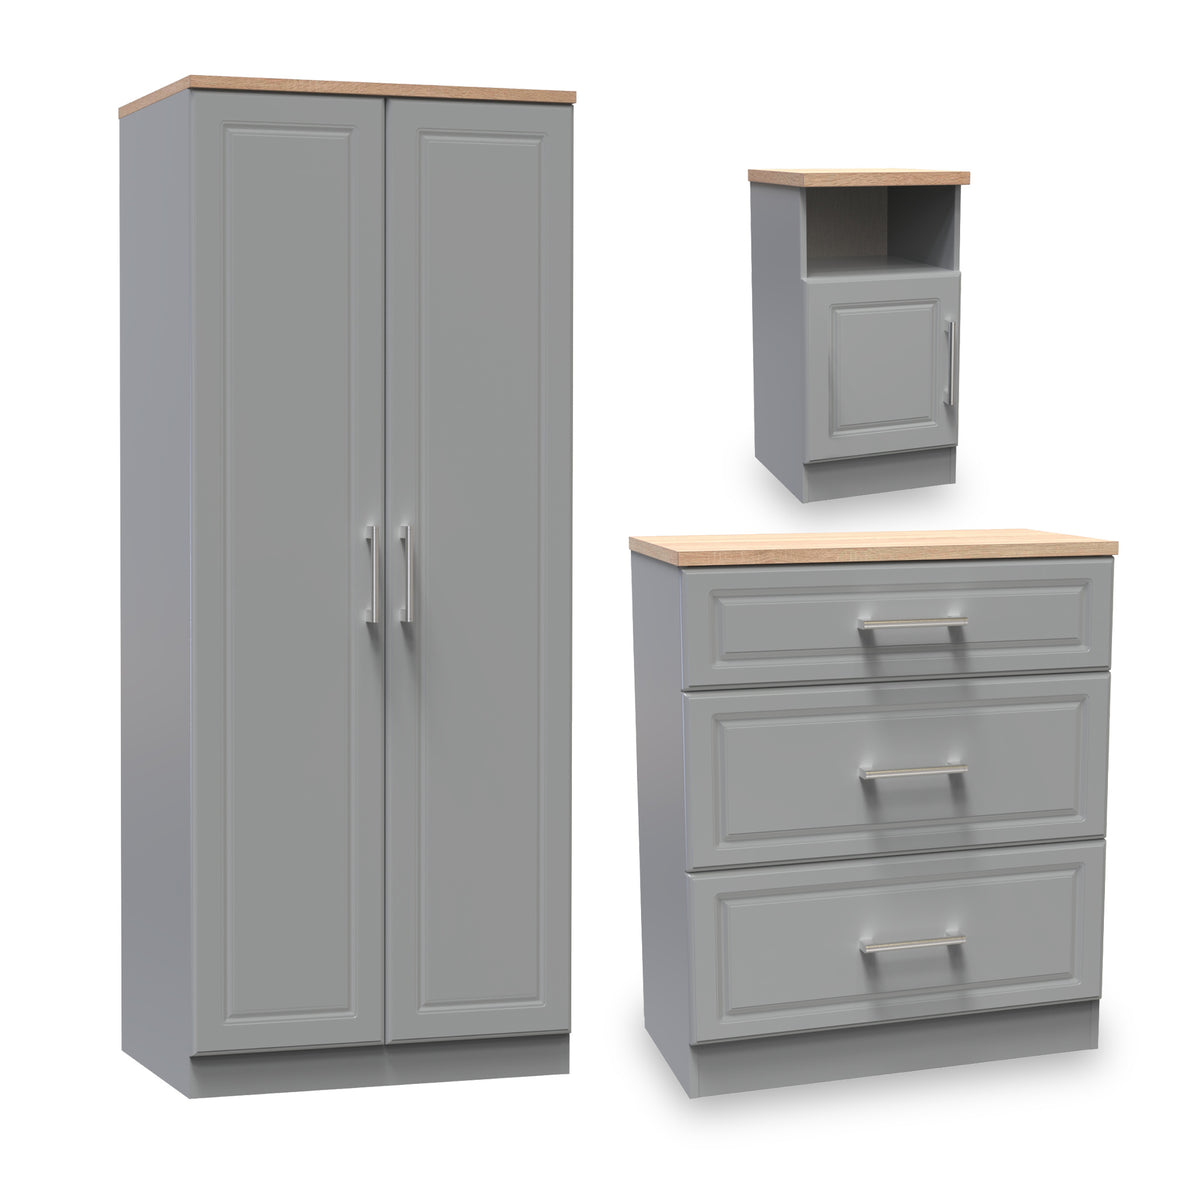 Talland Grey 3 Piece Bedroom Set with Oak Tops from Roseland Furniture